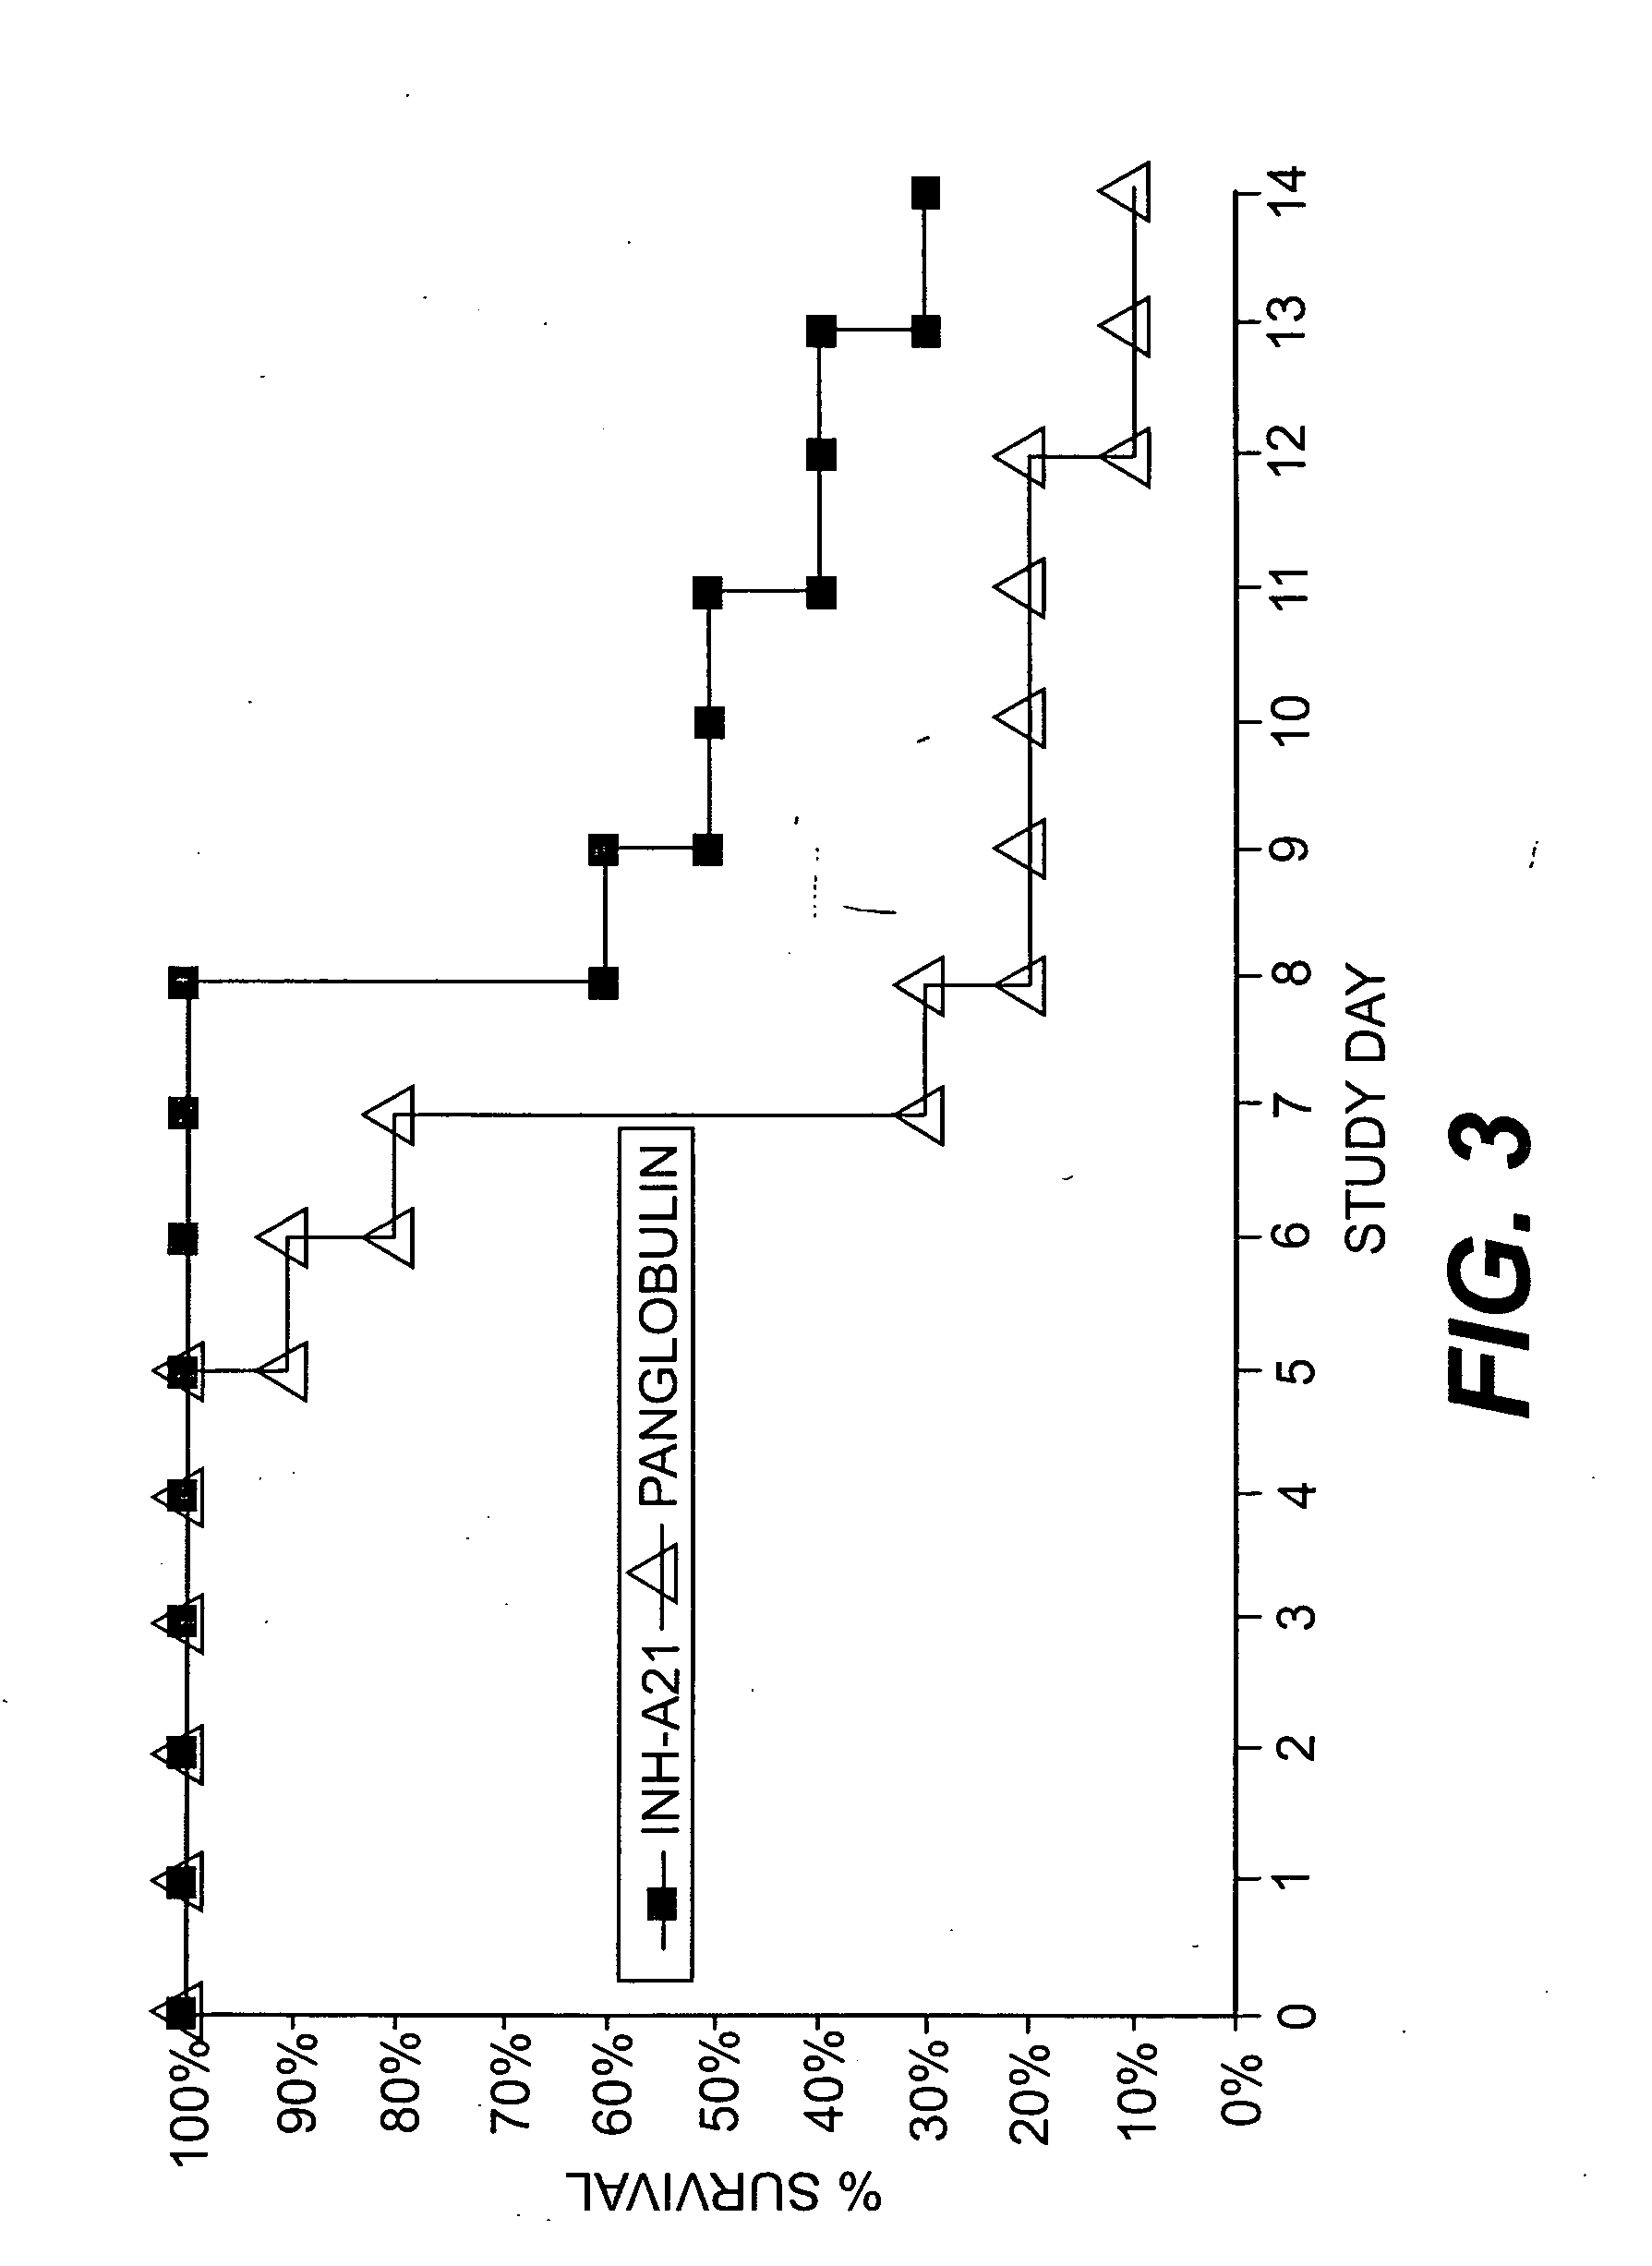 Method of inhibiting Candida-related infections using donor selected or donor stimulated immunoglobulin compositions